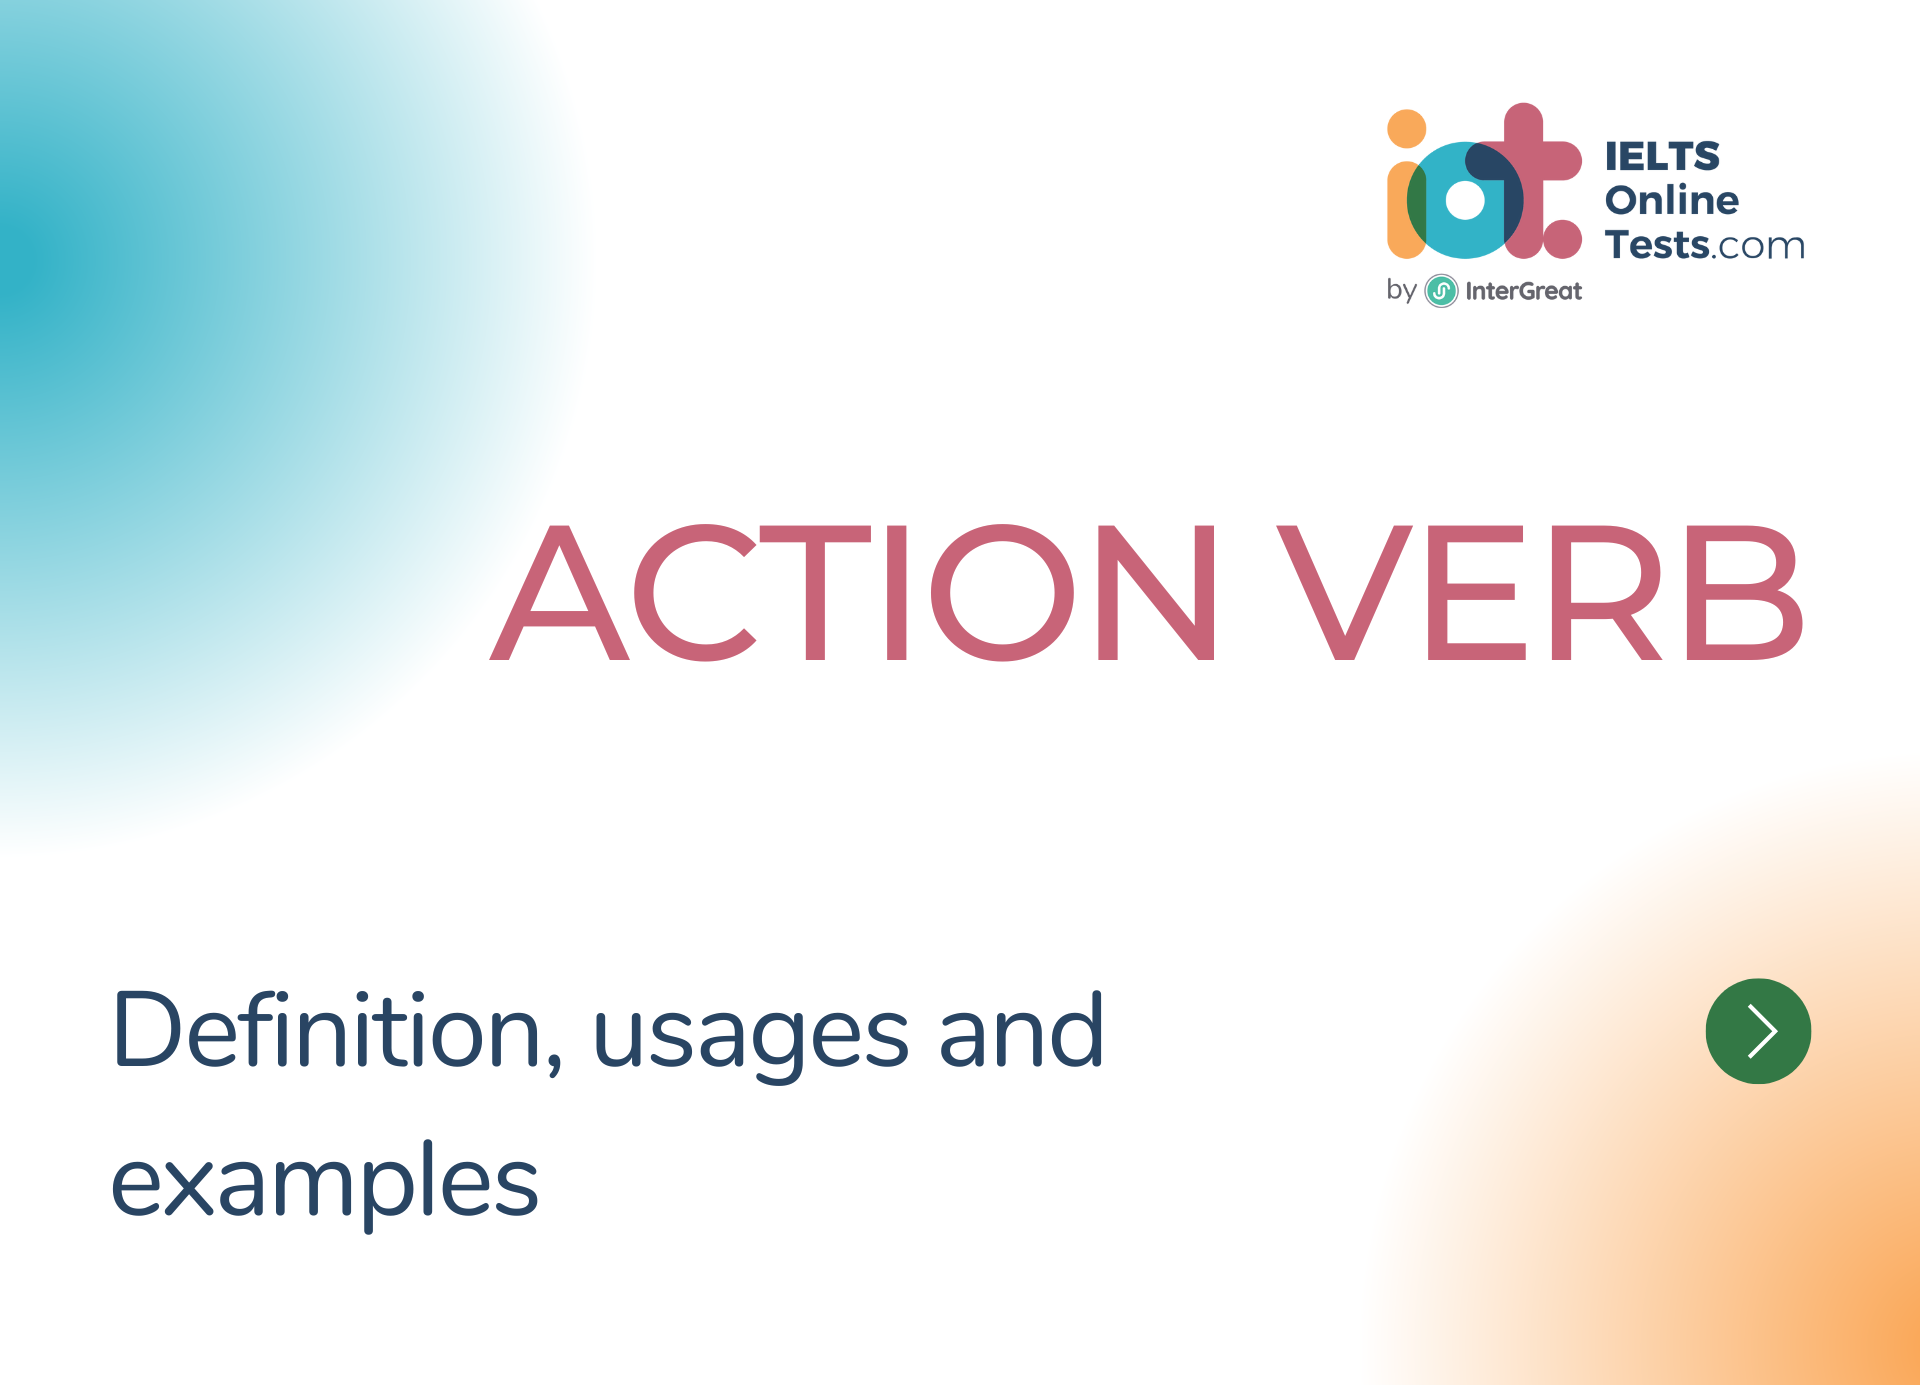 Action verb definition, usages and examples